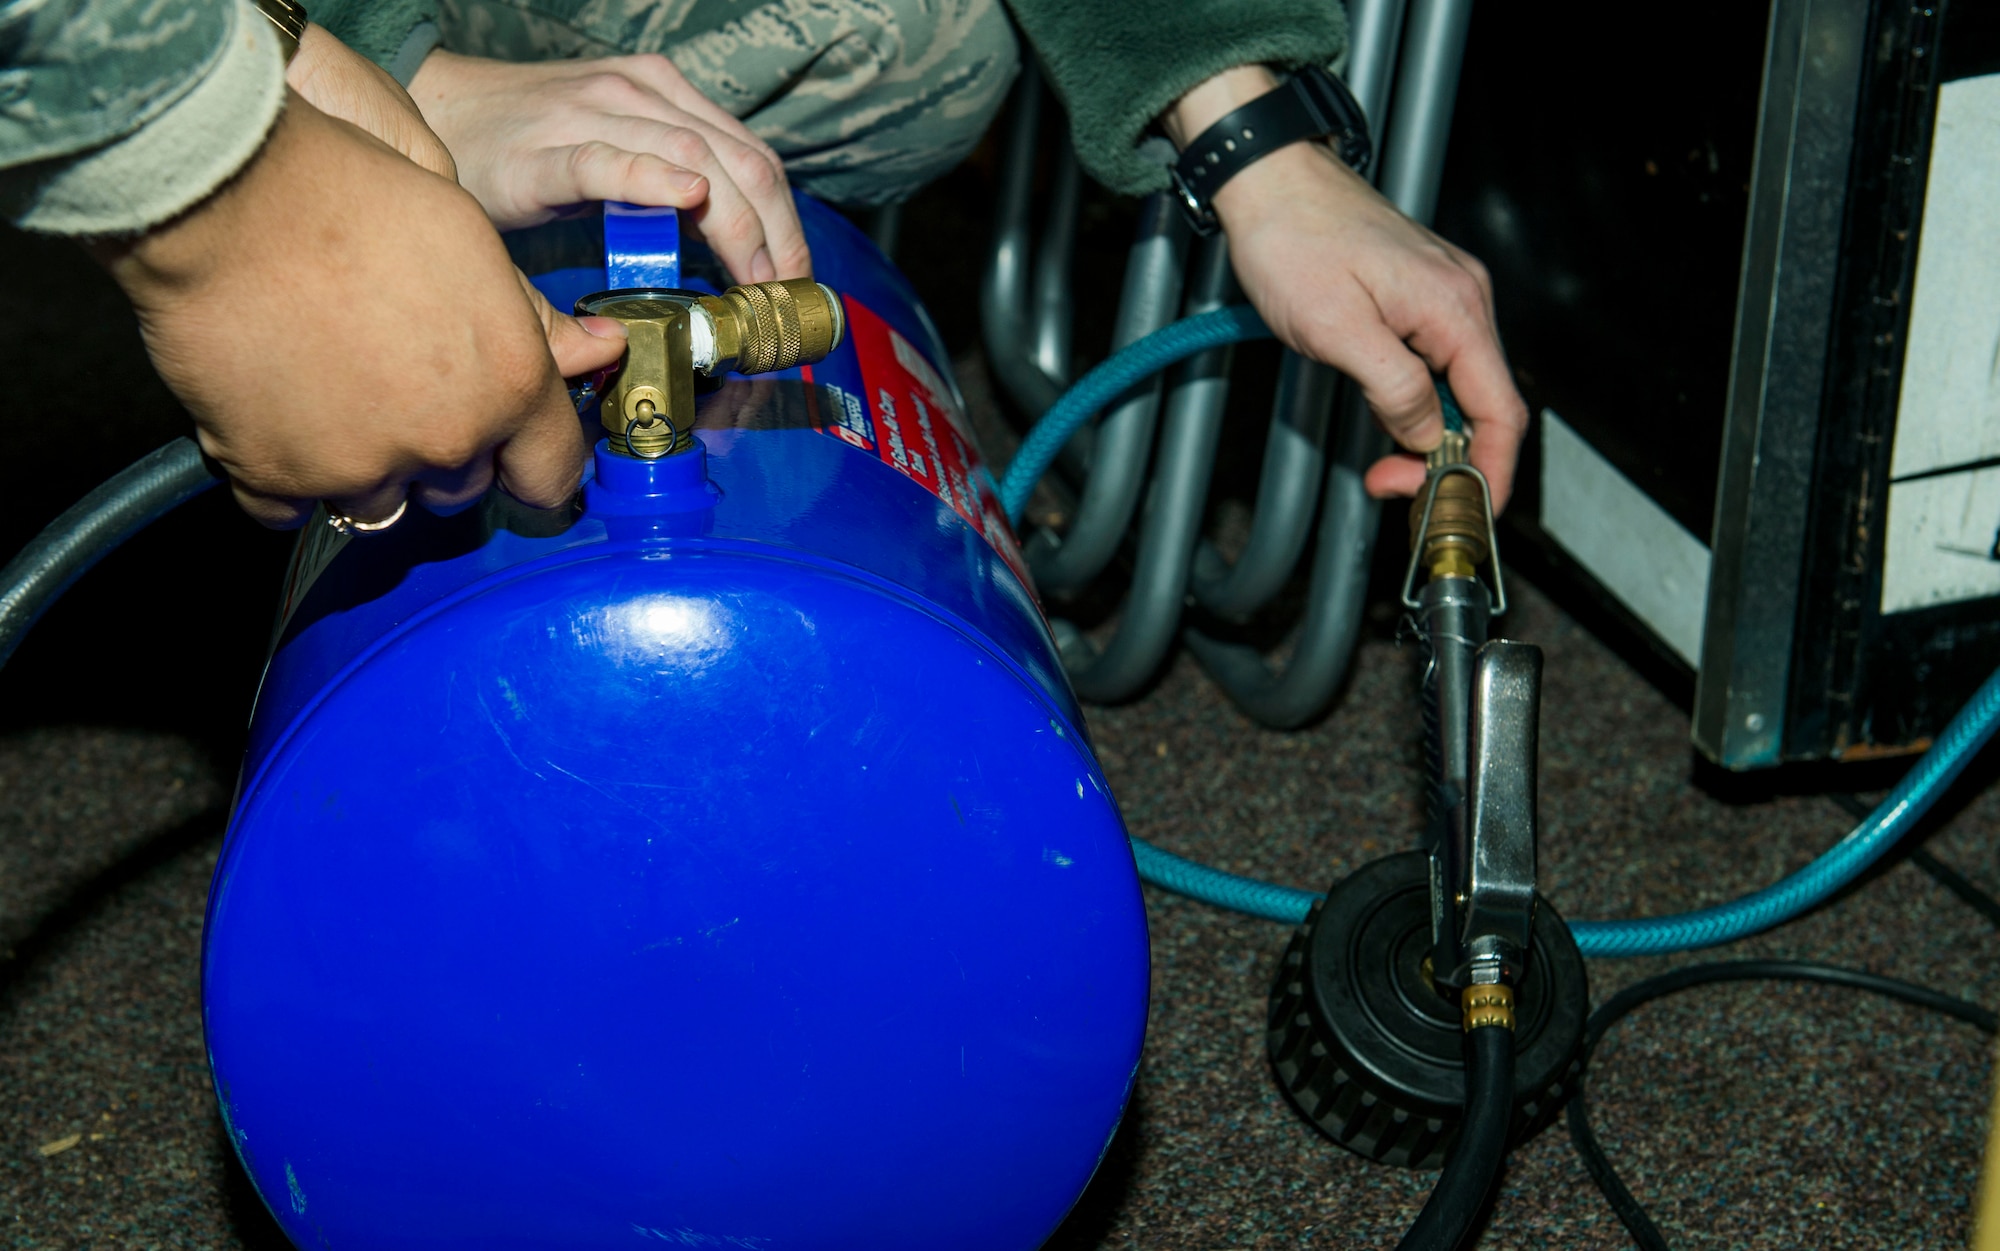 U.S. Air Force Staff Sgt. Brittany McGill, right, and U.S. Air Force Staff Sgt. Jessica Morgan, both 52nd Fighter Wing Safety occupational safety and health technicians, refill a hydraulics tank before a training session at the 52nd FW Safety building at Spangdahlem Air Base, Germany, Jan. 8, 2016. The 52nd FW Safety technicians use the hydraulics system as a tool to release and lock special wheels located on the rear of their training vehicle, simulating slippery road conditions when released. (U.S. Air Force photo by Airman 1st Class Timothy Kim/Released)